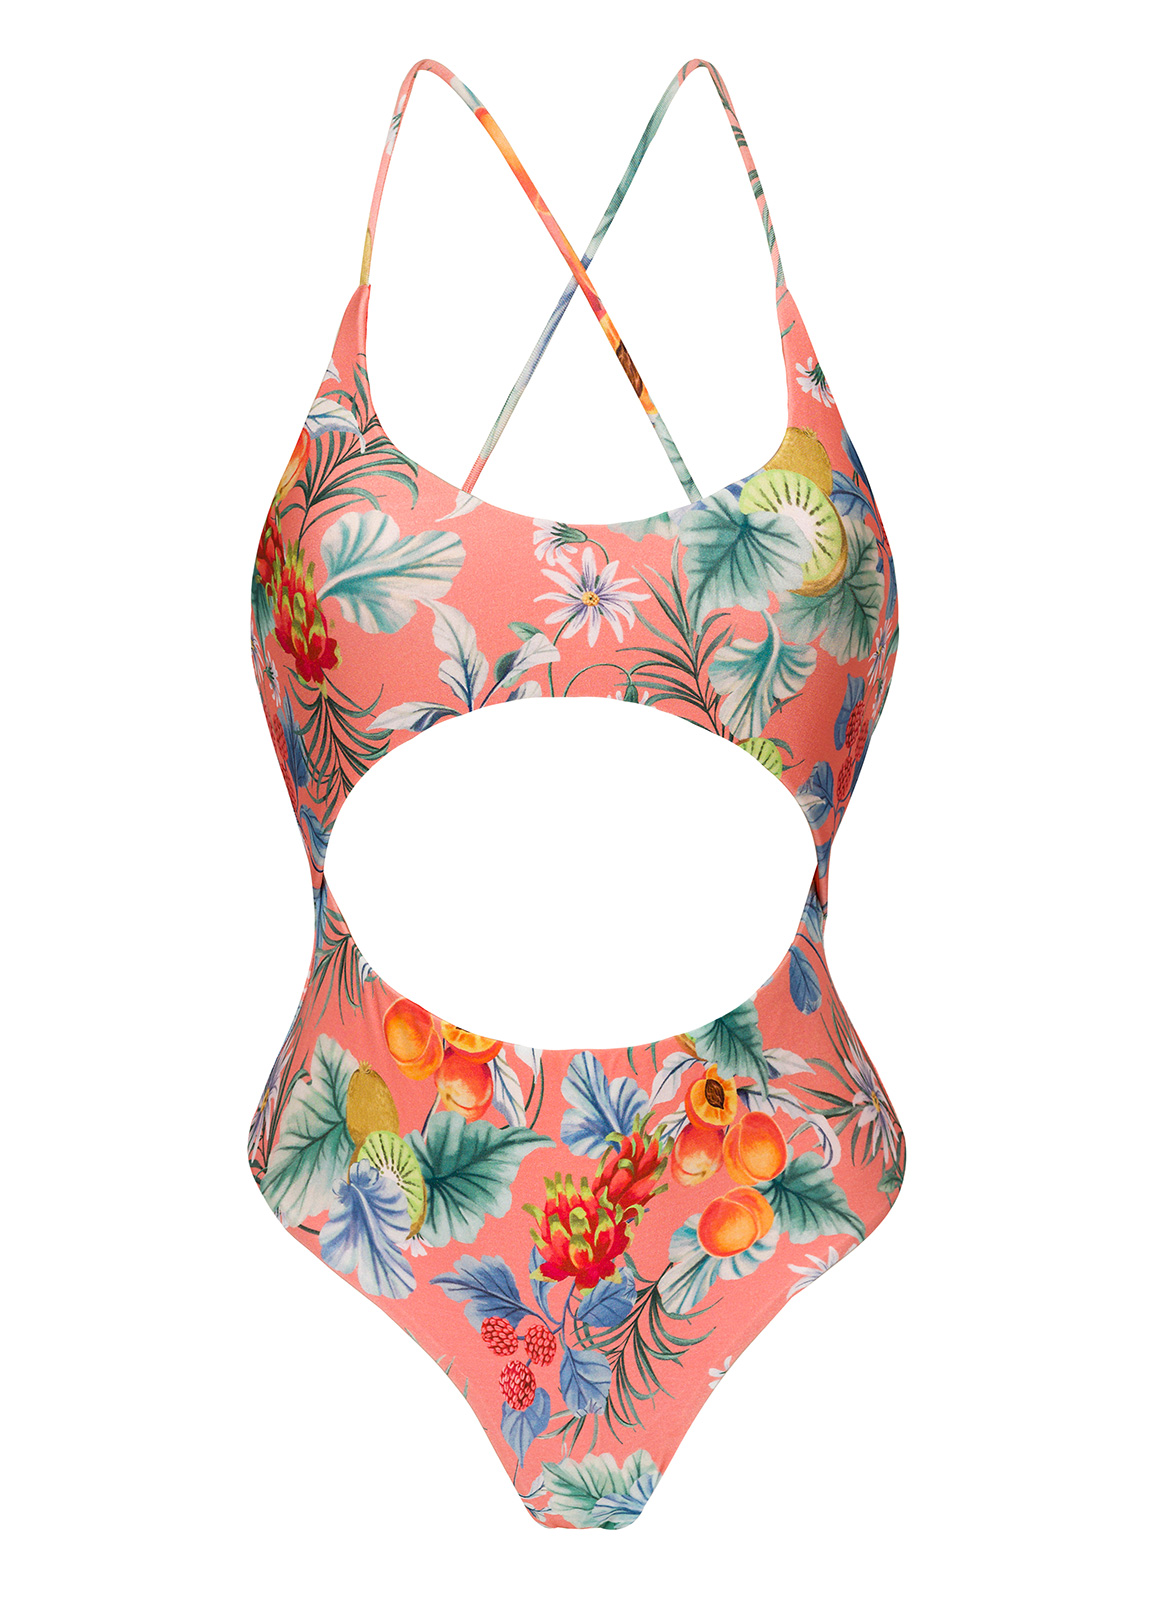 Textured Coral Belly Cutout Brazilian One-Piece Swimsuit Dots-Tabata Ivy  Strap - Brand Rio de Sol